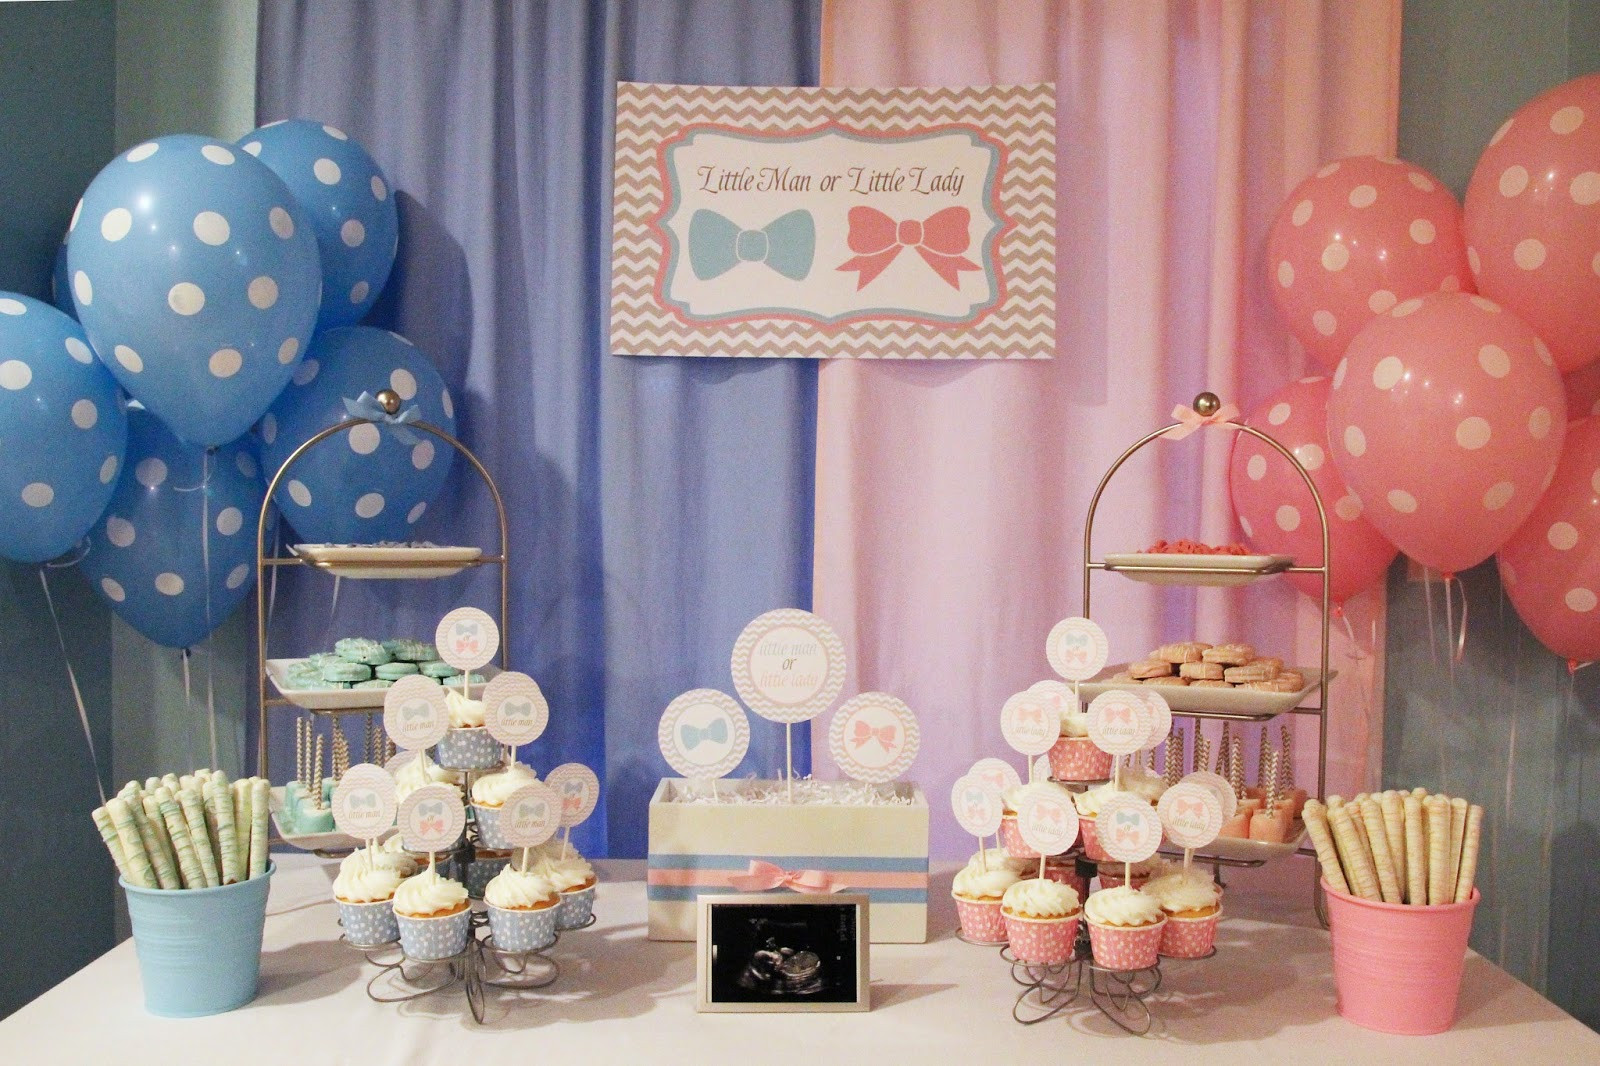 Reveal The Gender Party Ideas
 5M Creations Gender Reveal Party Little Man or Little Lady